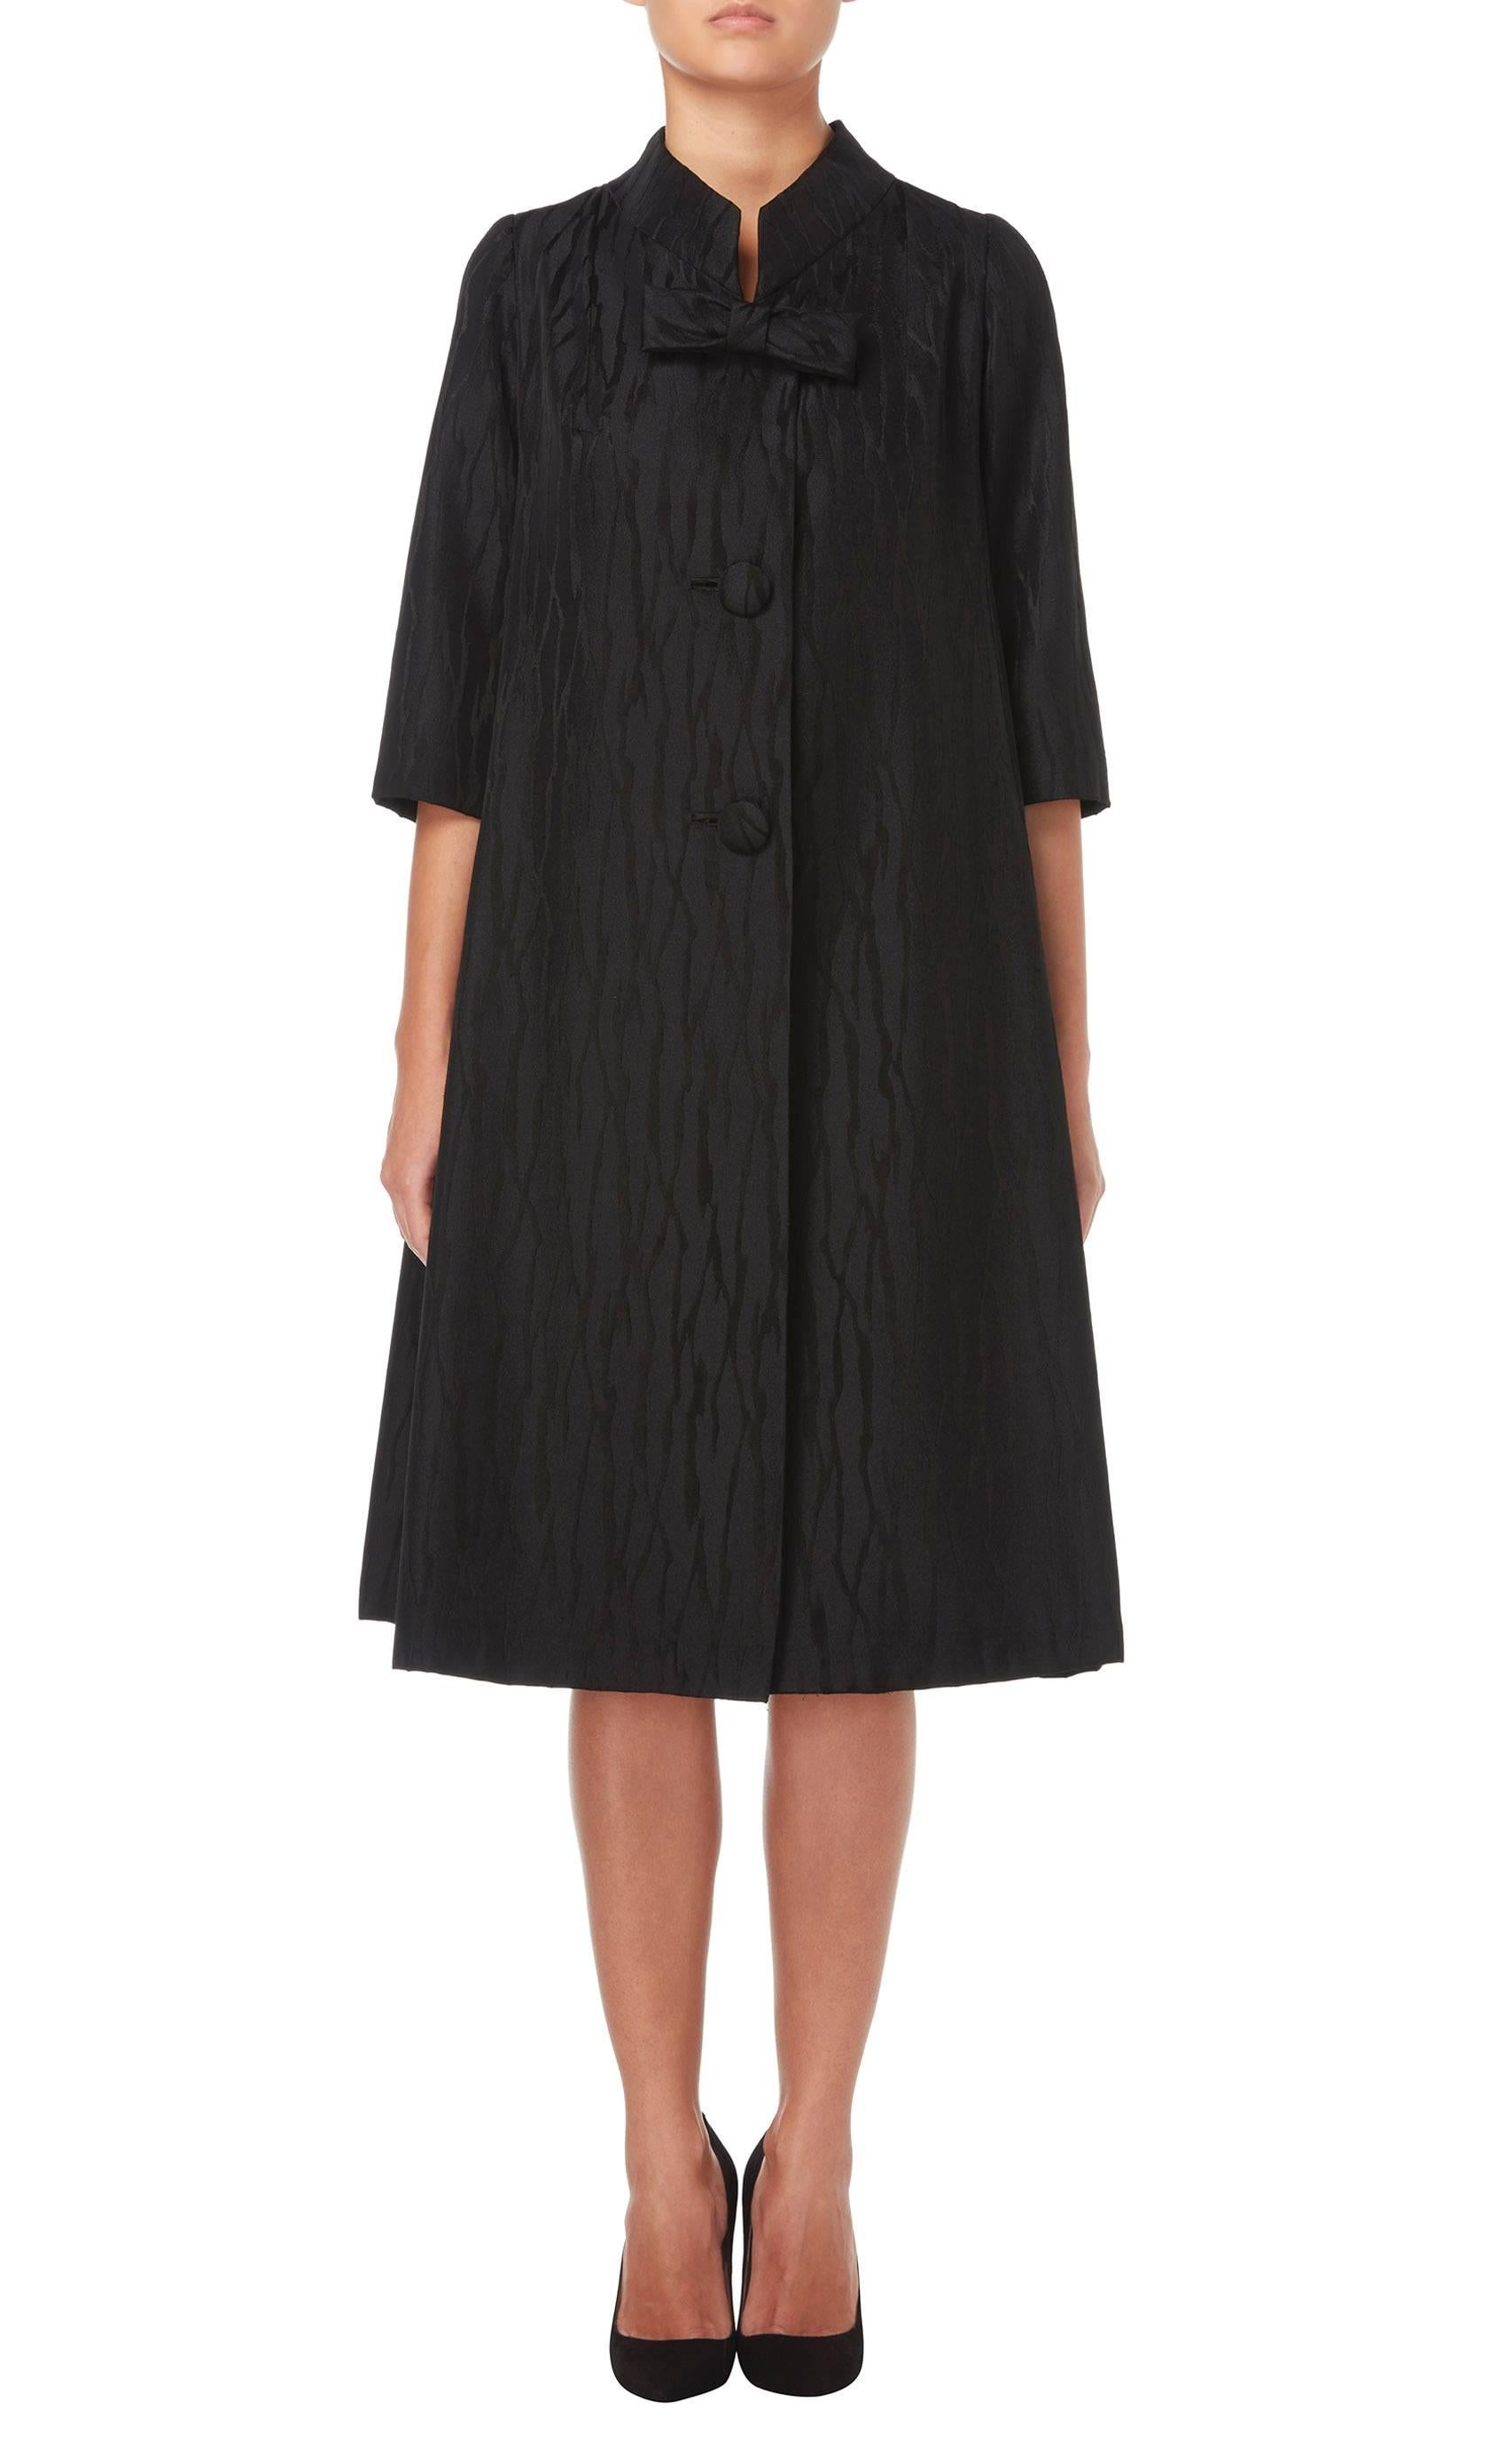 This chic swing coat in jacquard black silk is a fabulous option for an evening event. The A-line cut, wide standing collar and bracelet length sleeves create a classic silhouette, while the large fabric matched buttons and bow on the bust add a